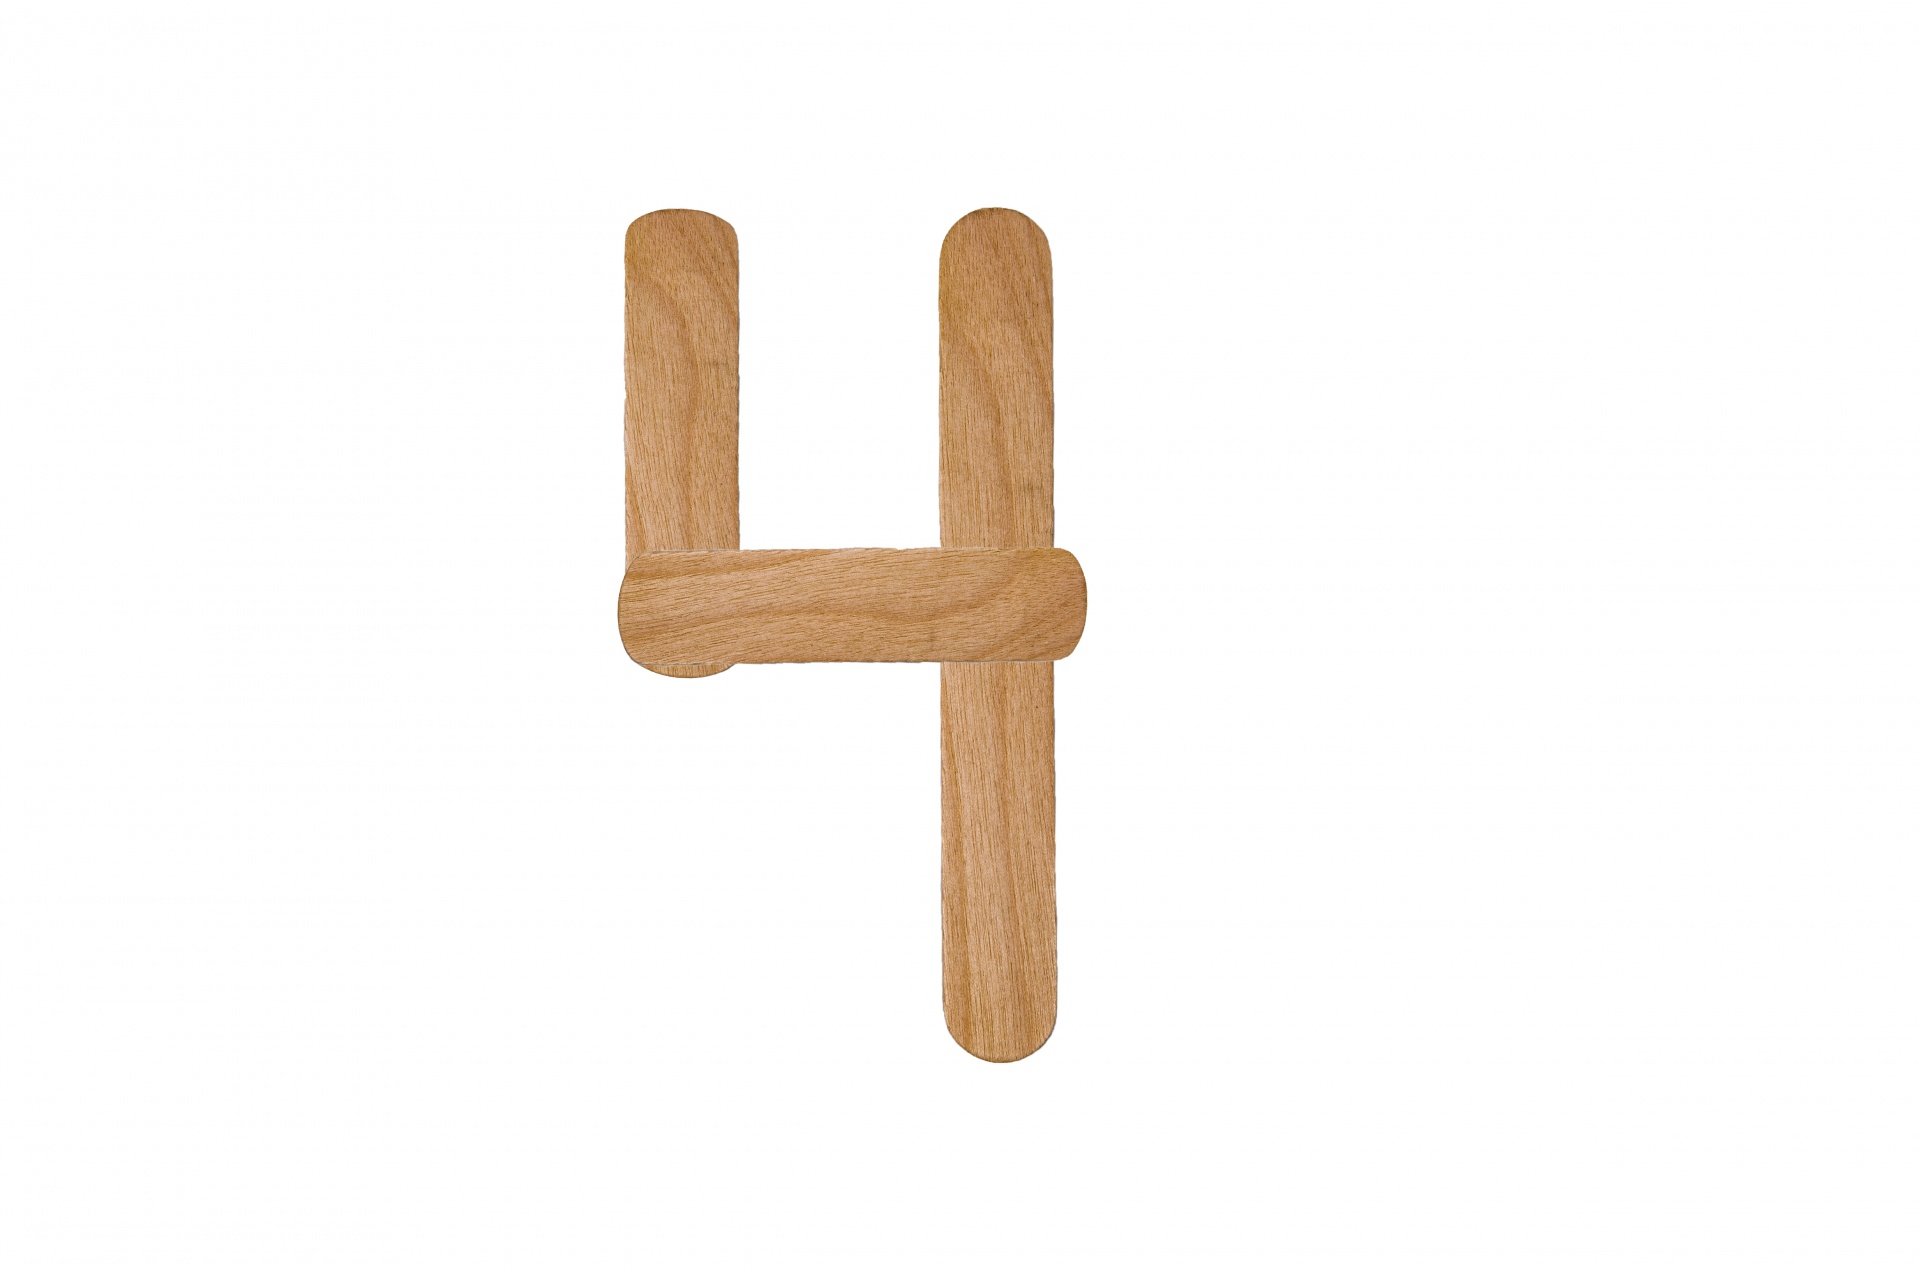 wooden number stick free photo